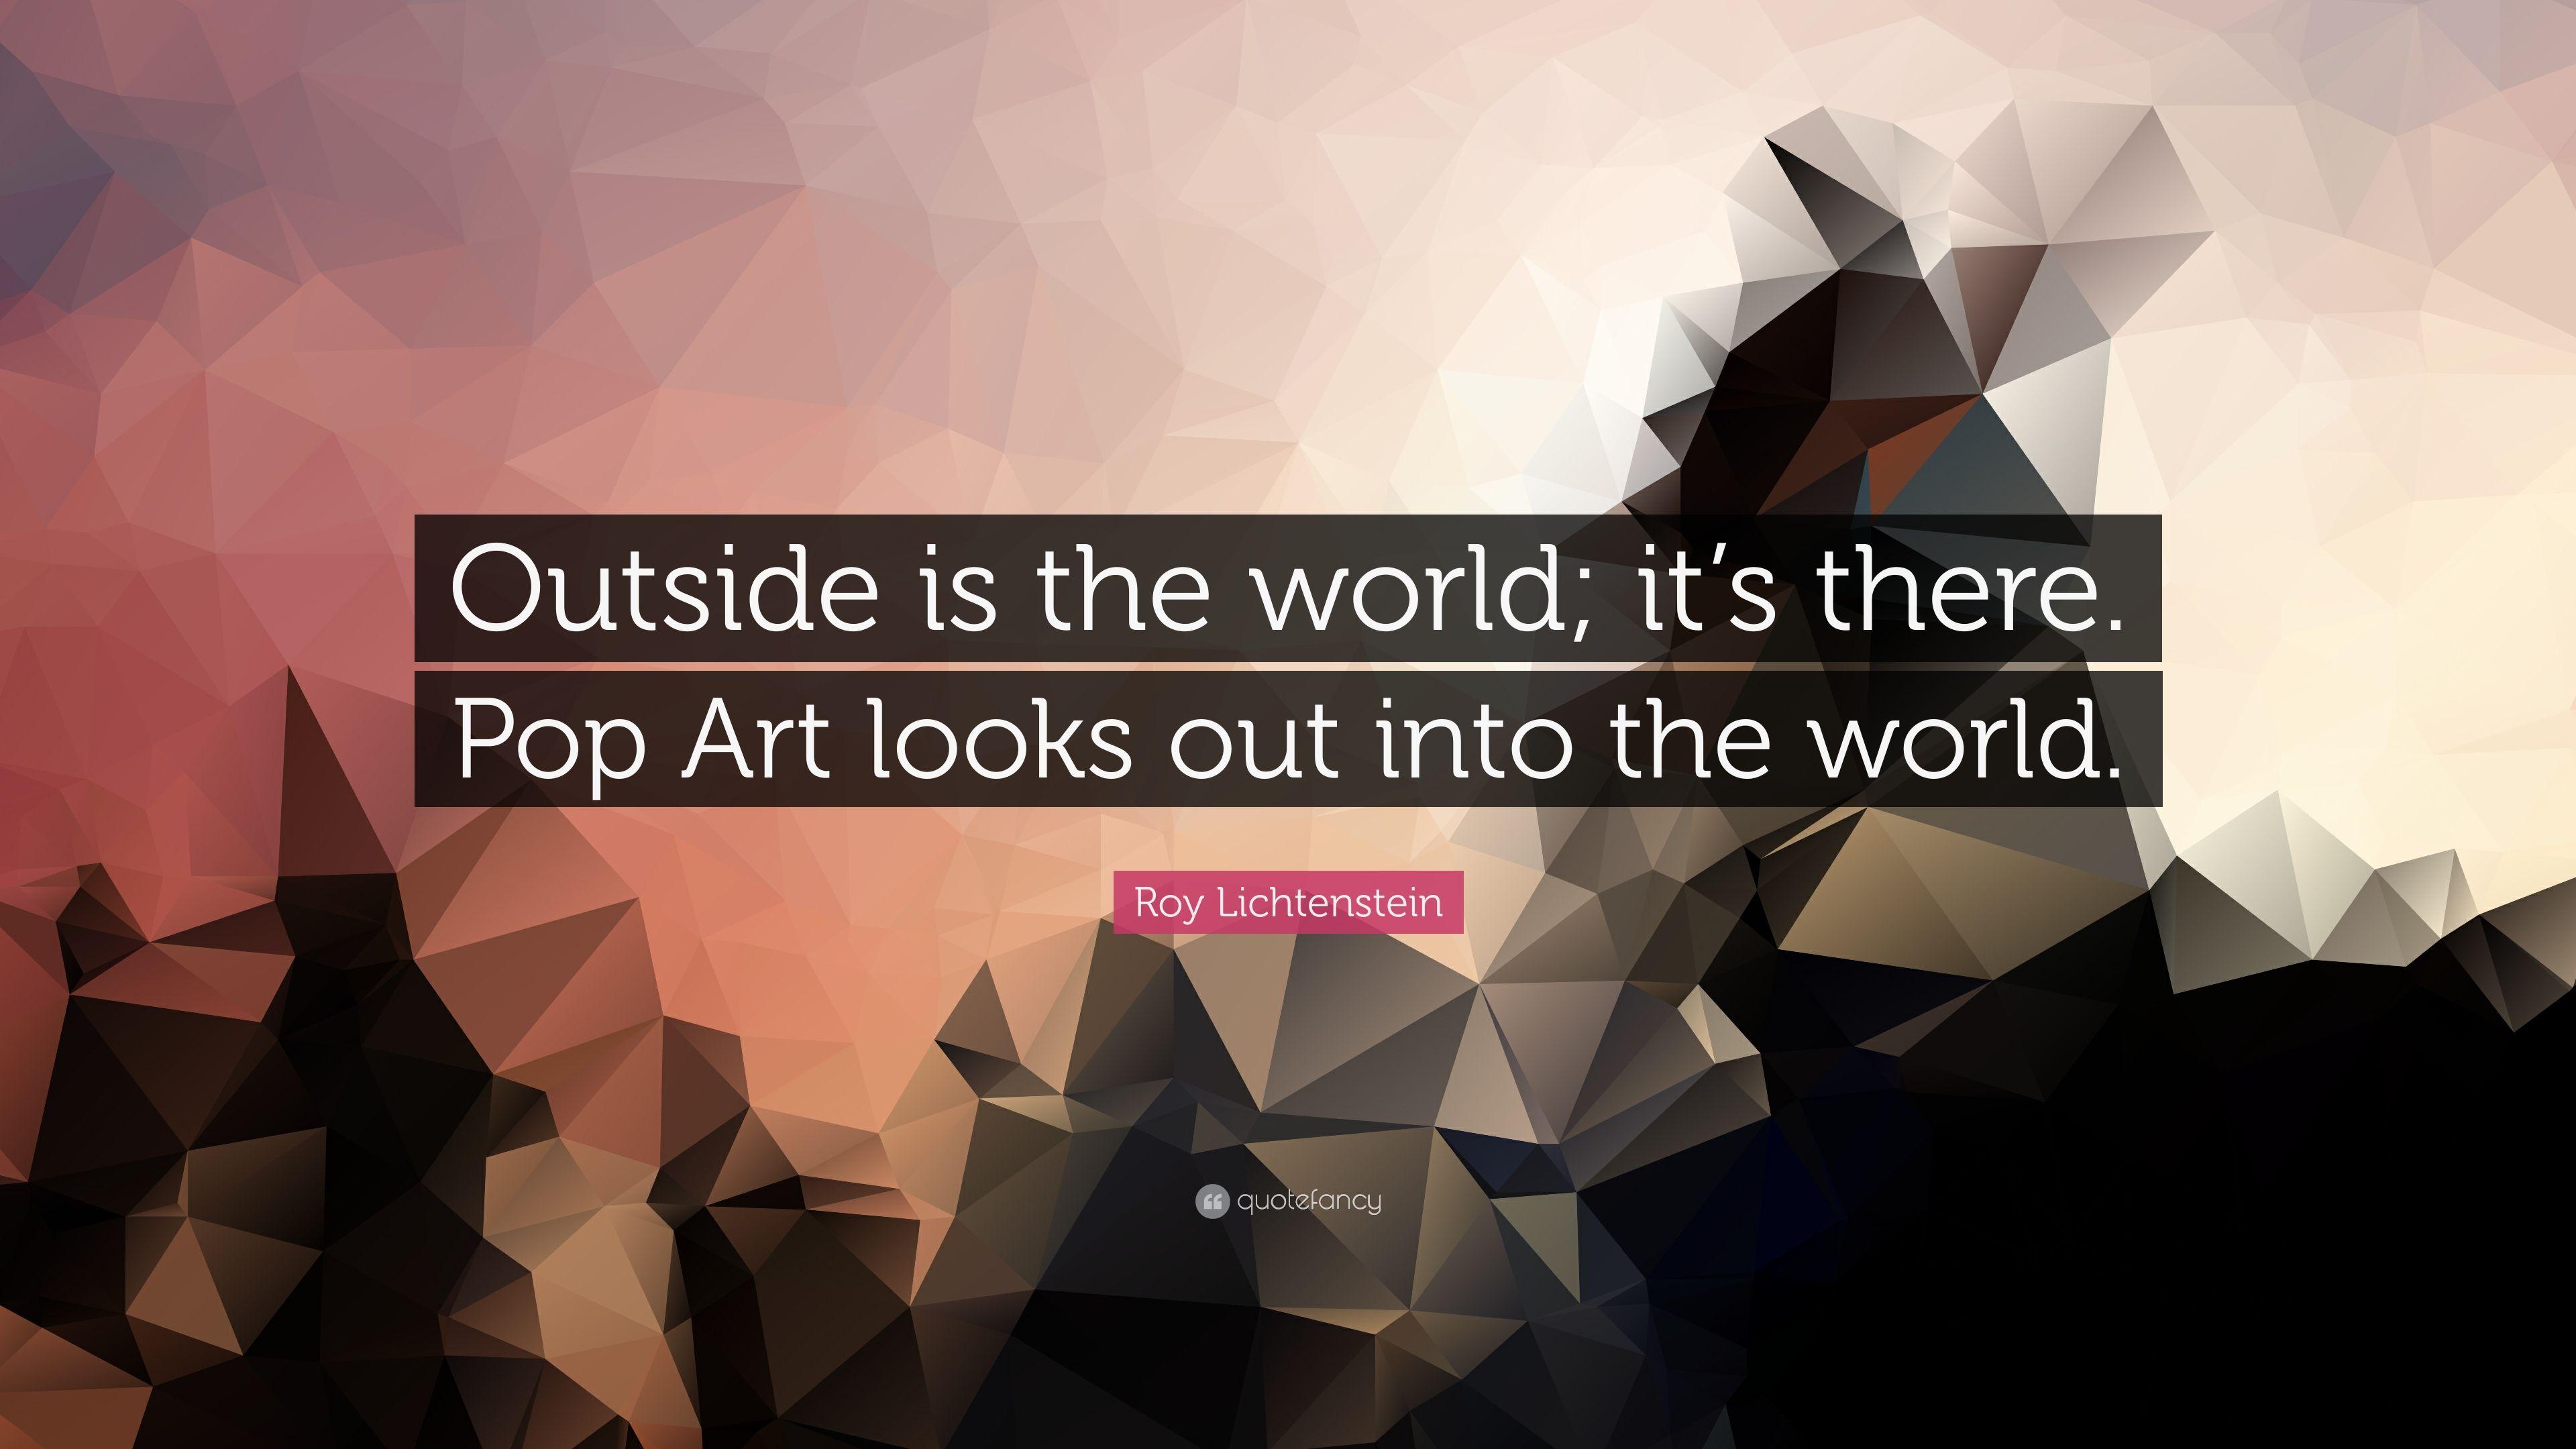 Roy Lichtenstein Quote: “Outside is the world; it's there. Pop Art